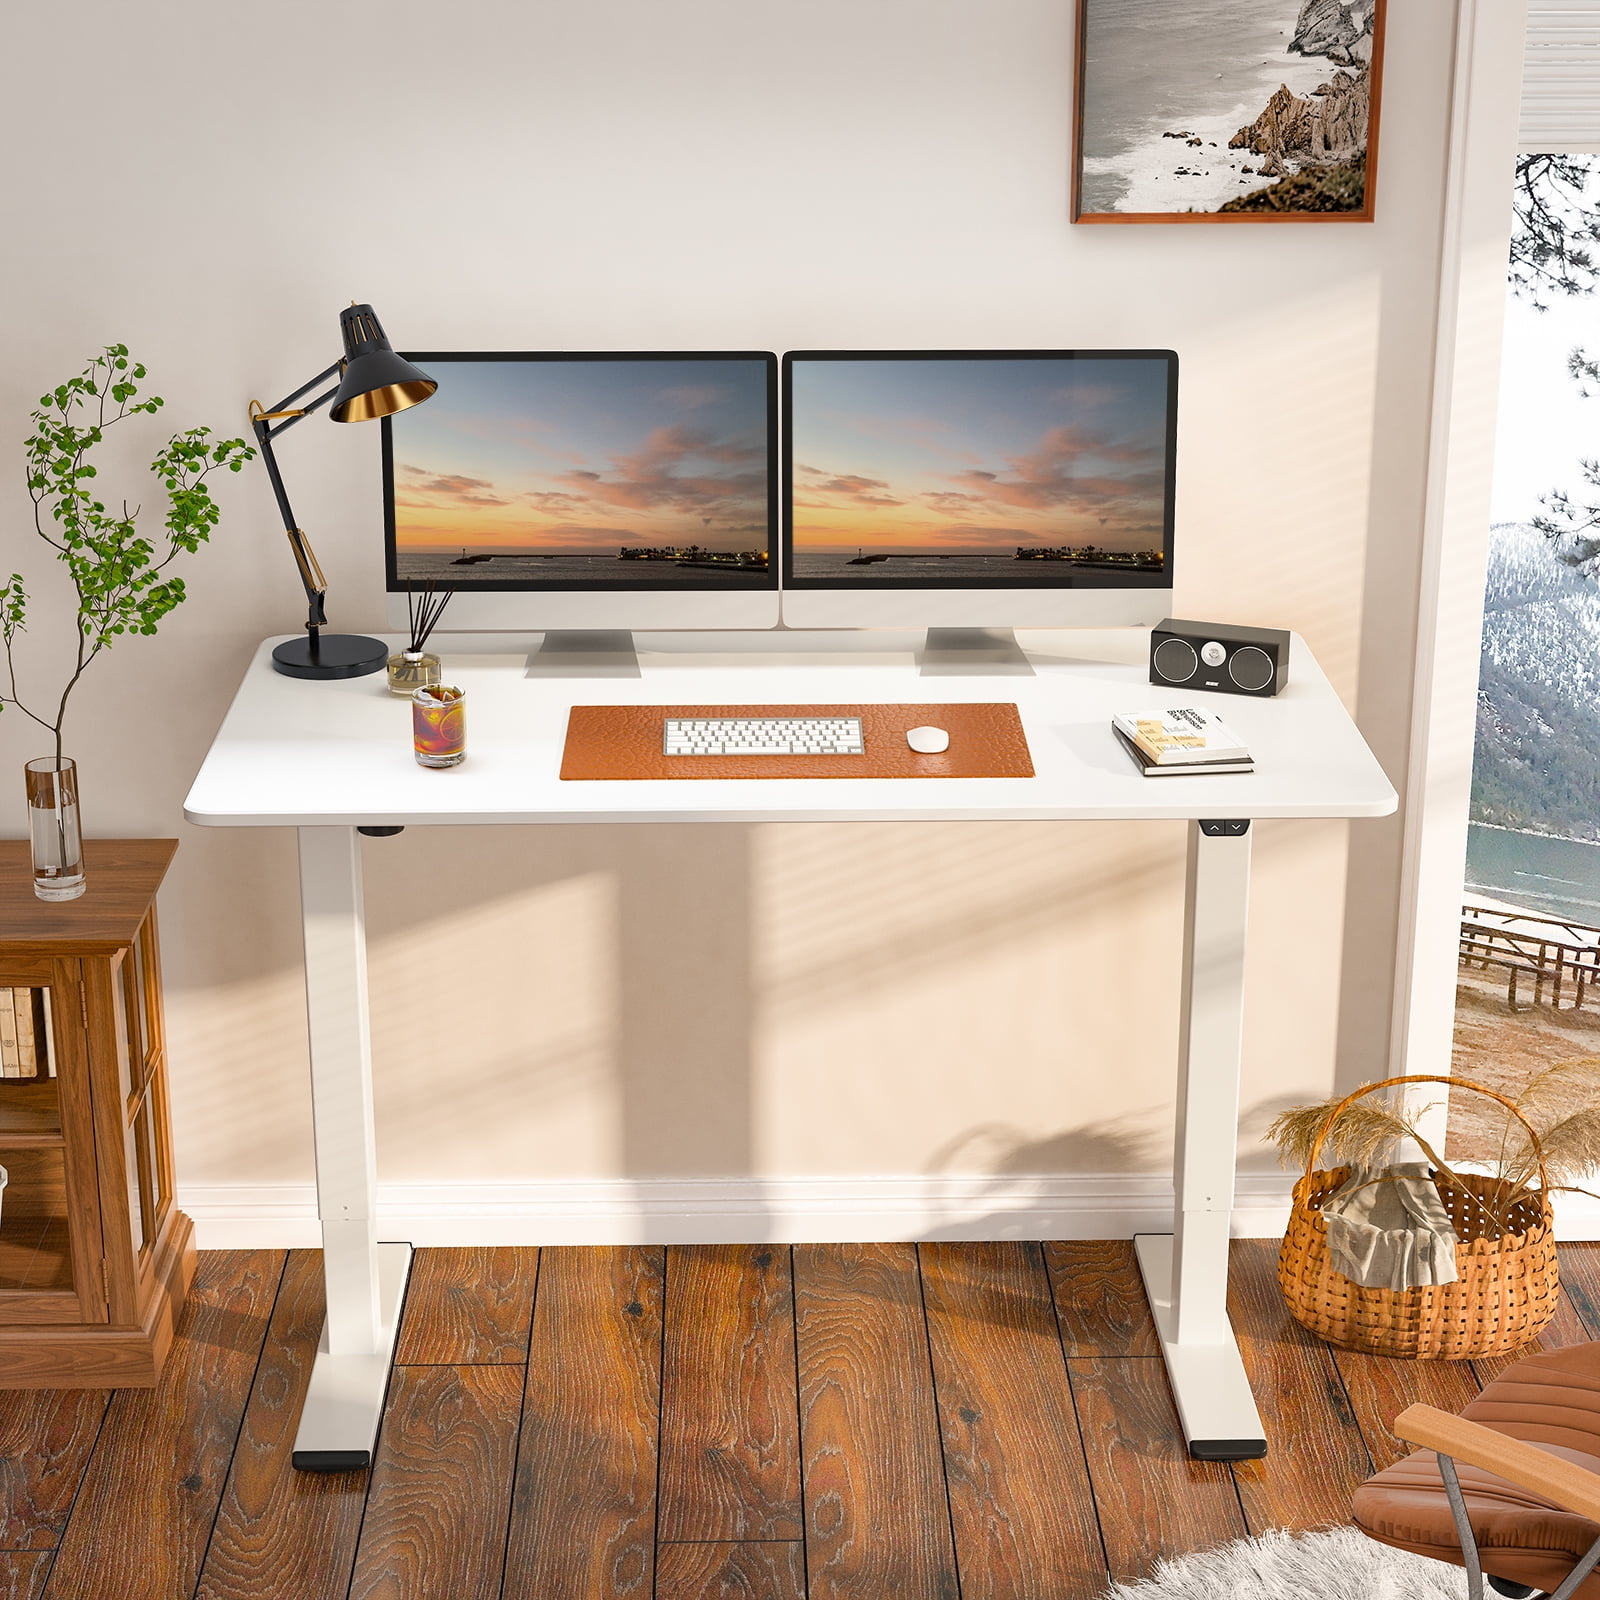 55 x 28 Inches Home Office Table Standing Desk Dual Motors,3 Stages, Silver+Mahogany FlexiSpot Electric Height Adjustable Desk 